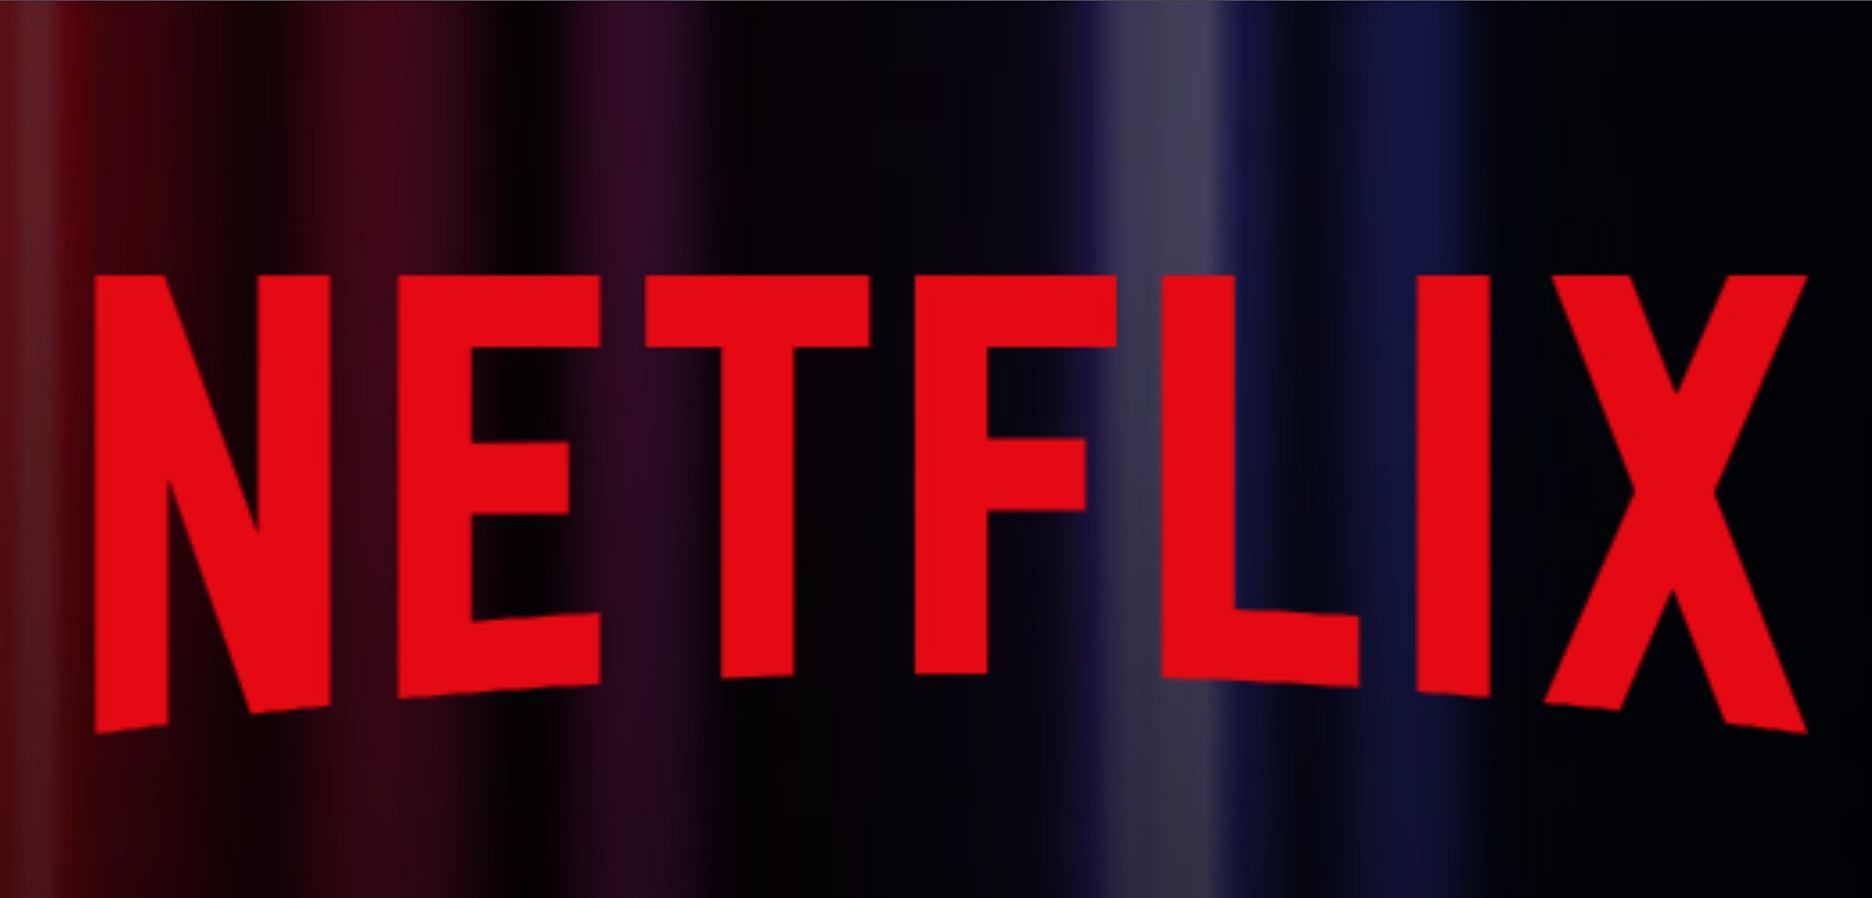 Netflix fans may be up for another price hike (Image via Netflix)